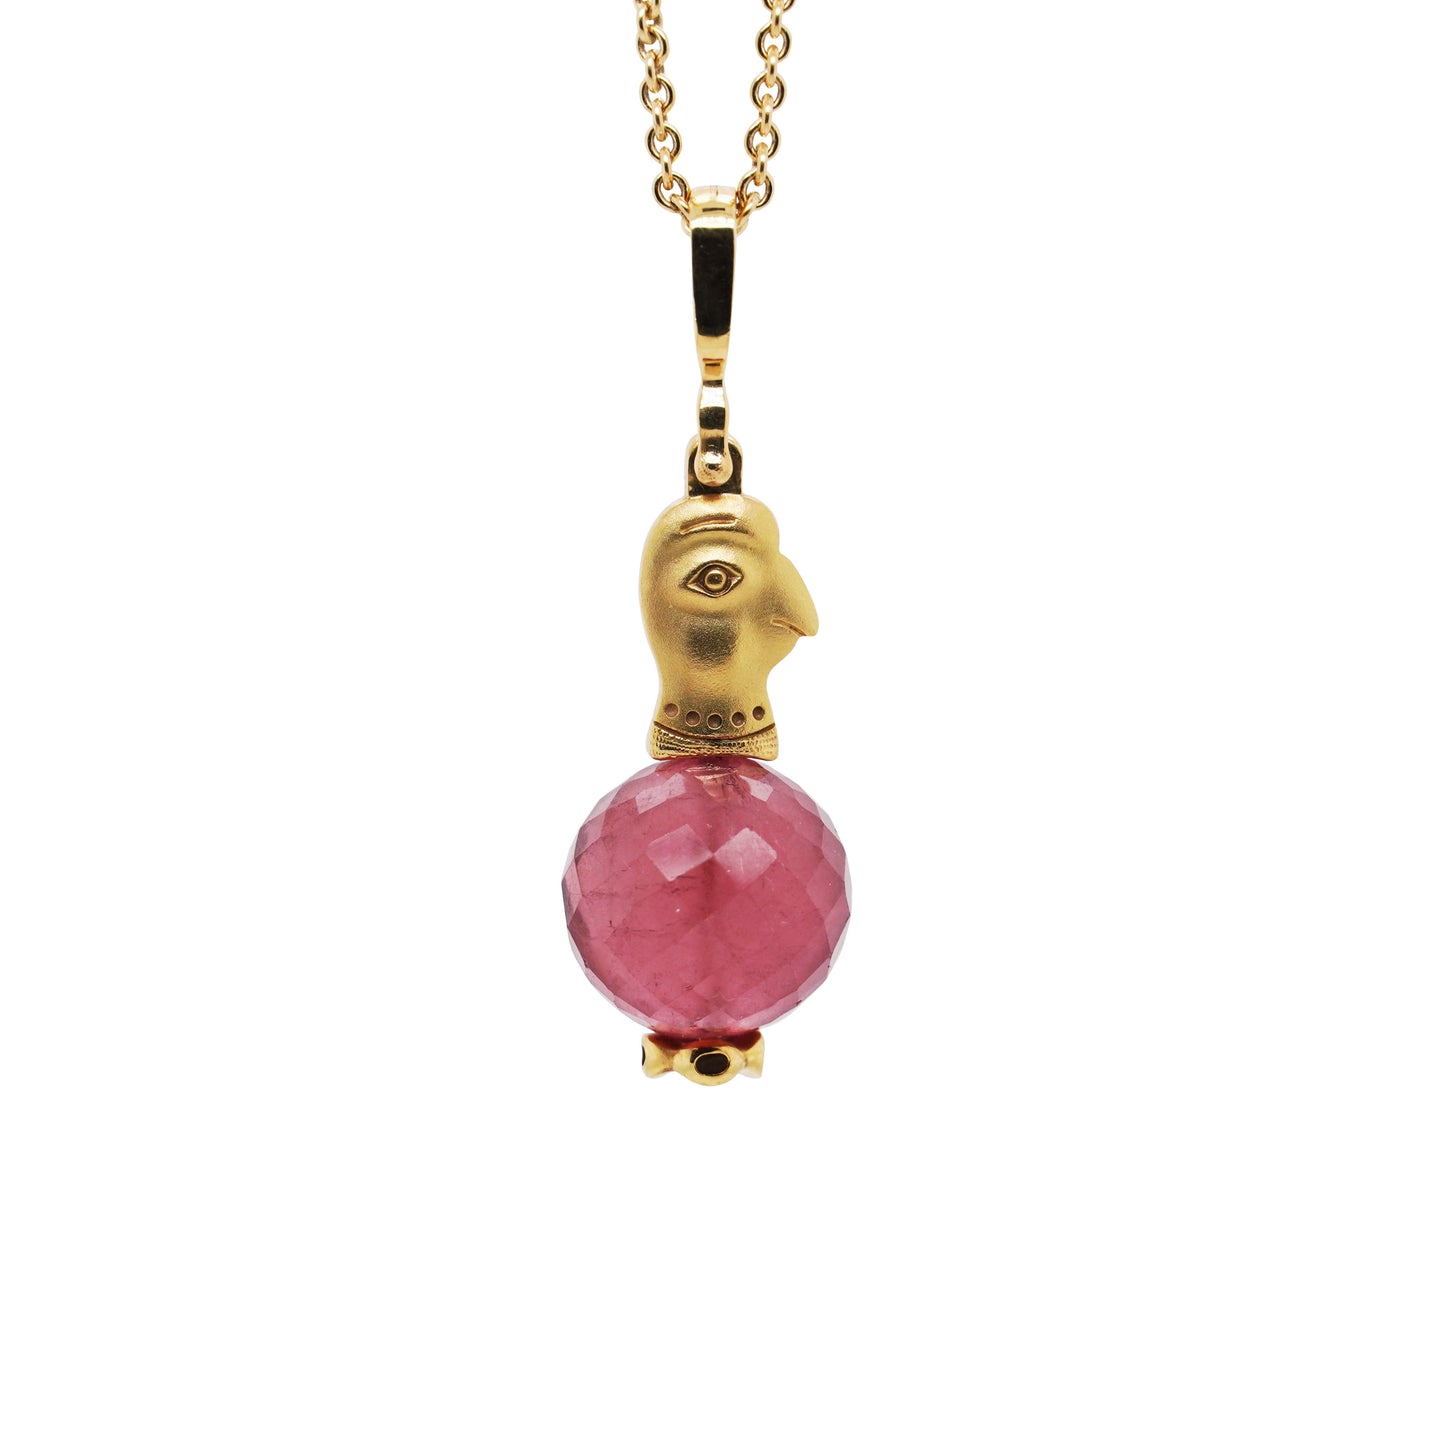 “Pearl” the Parrott with Faceted Pink Tourmaline